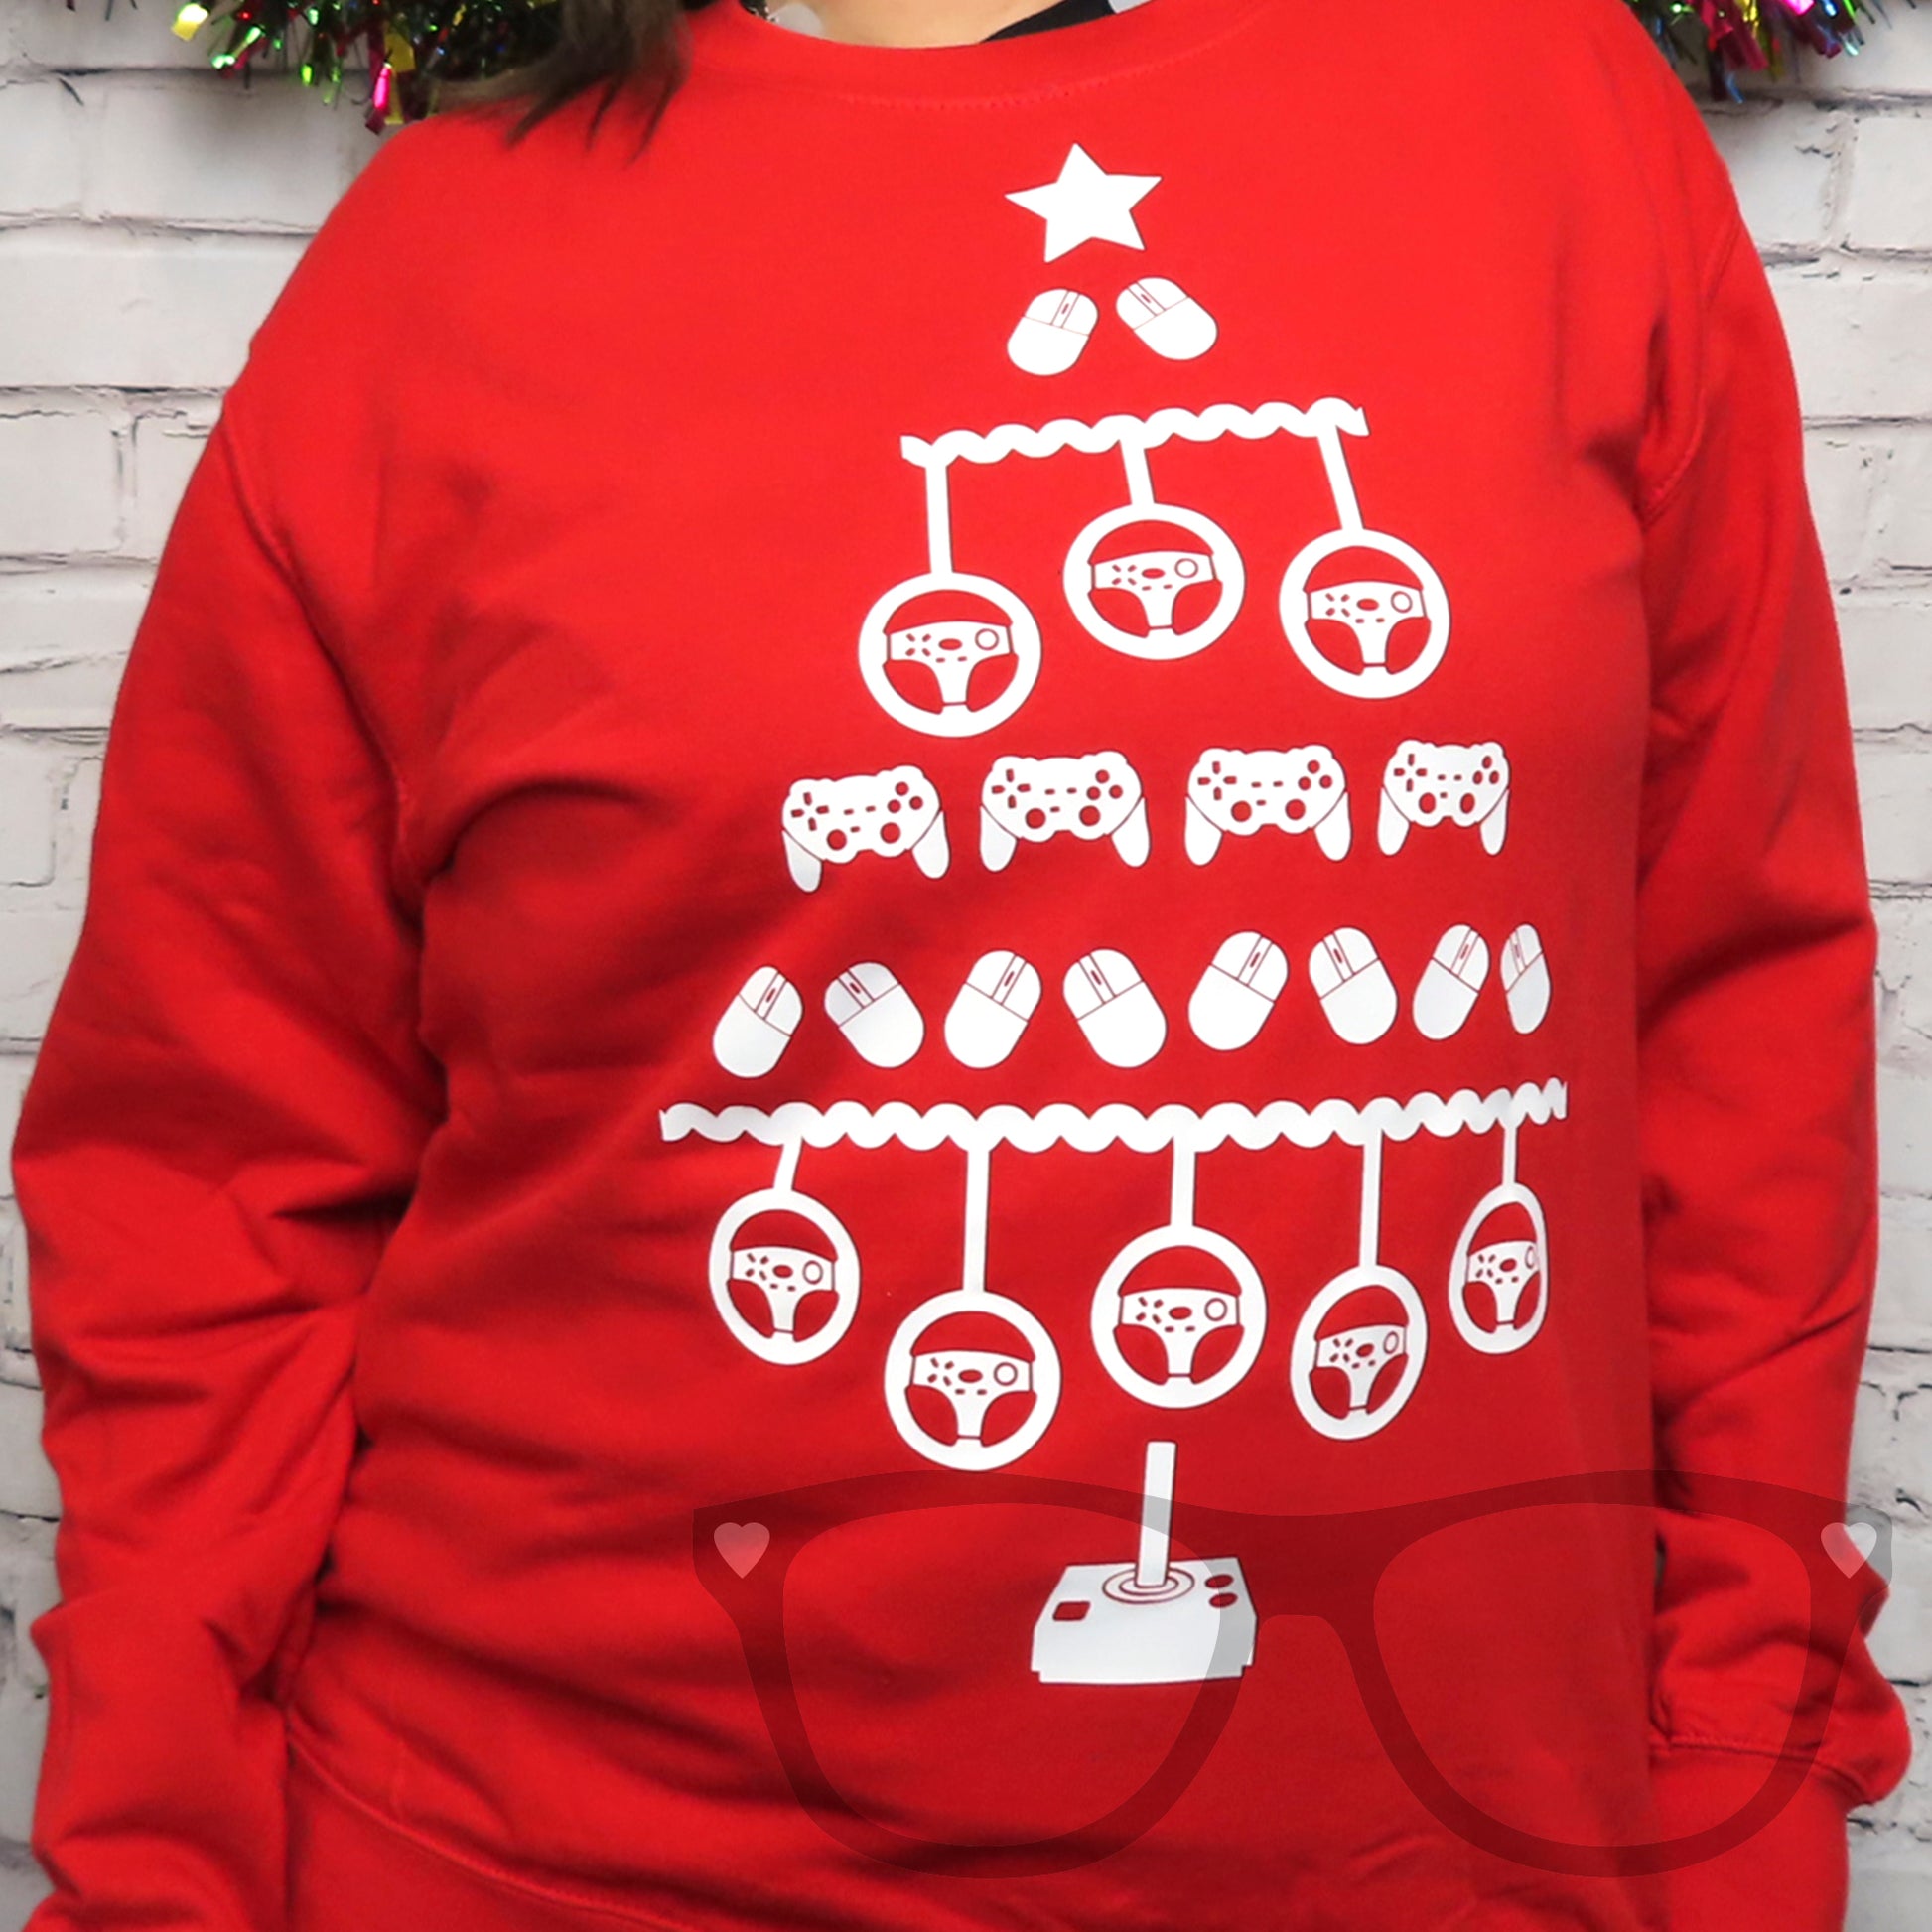 Fire red Video Gaming Sweater ideal for christmas festive period, features a white vinyl design of games controlelrs